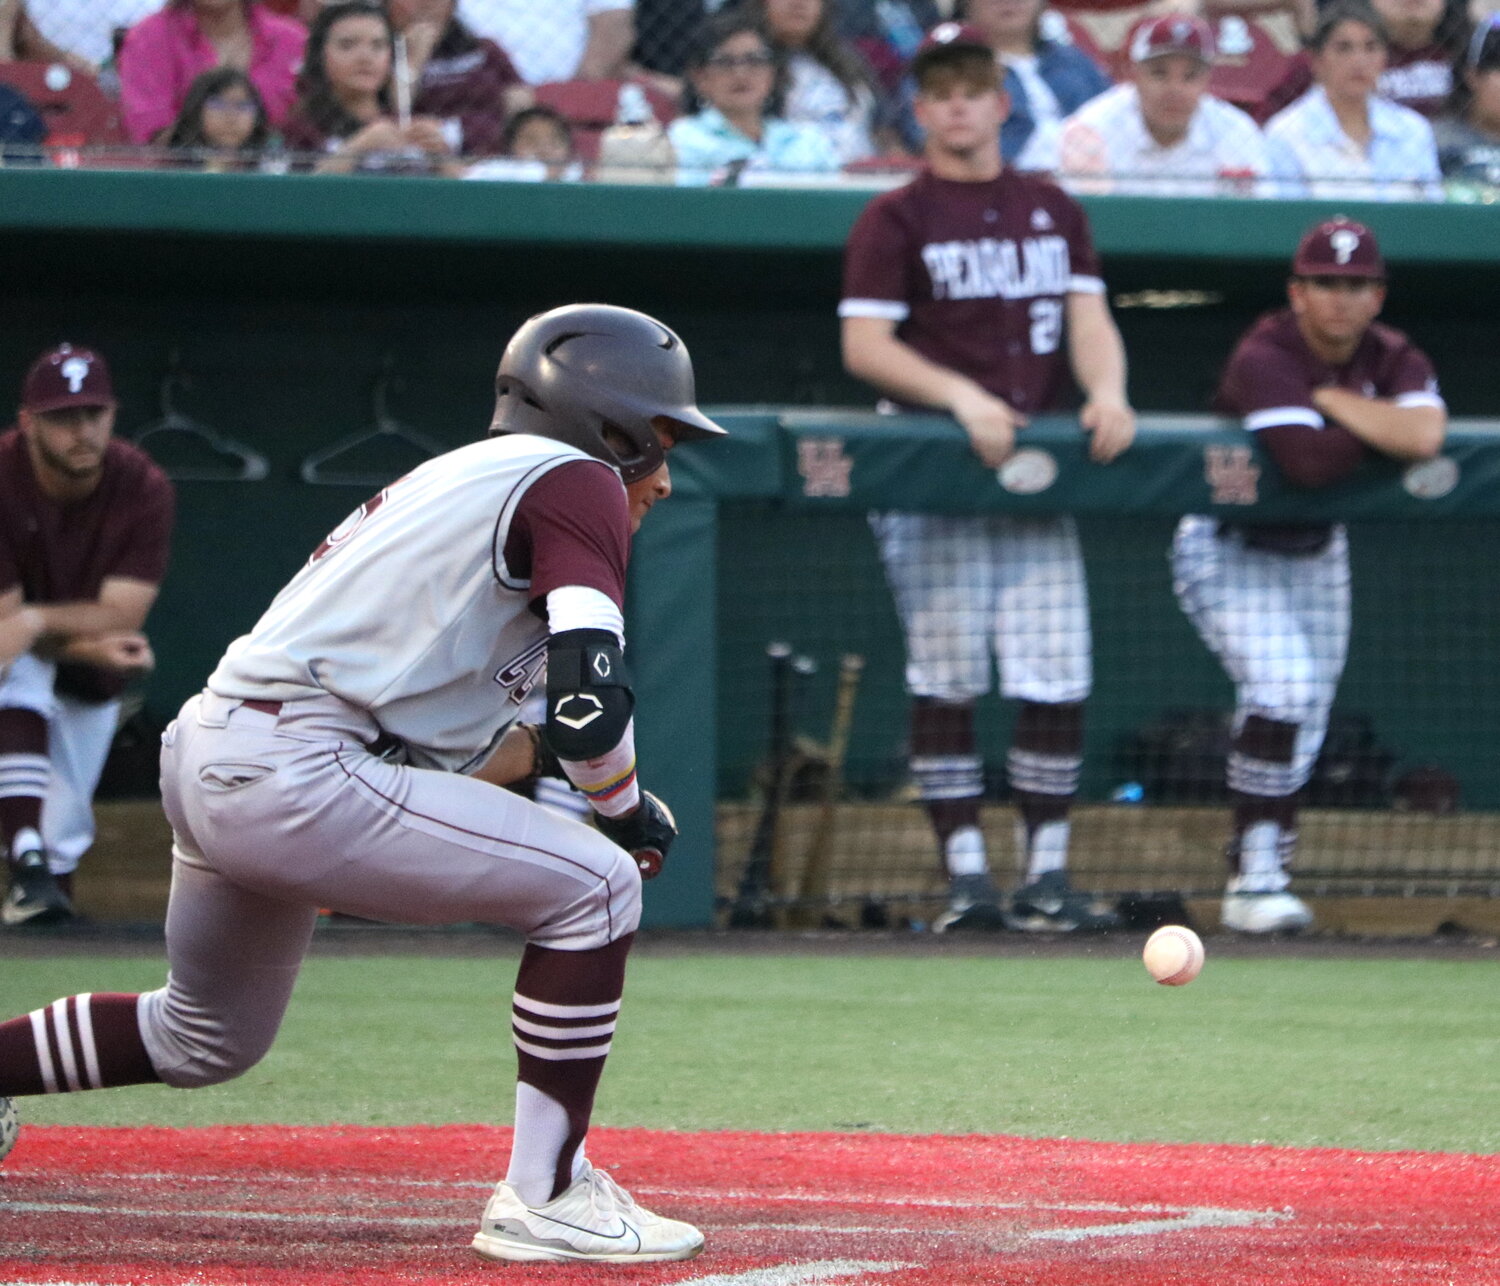 Paul Acosta bunts during Friday's regional semifinal between Cinco Ranch and Pearland at The University of Houston.